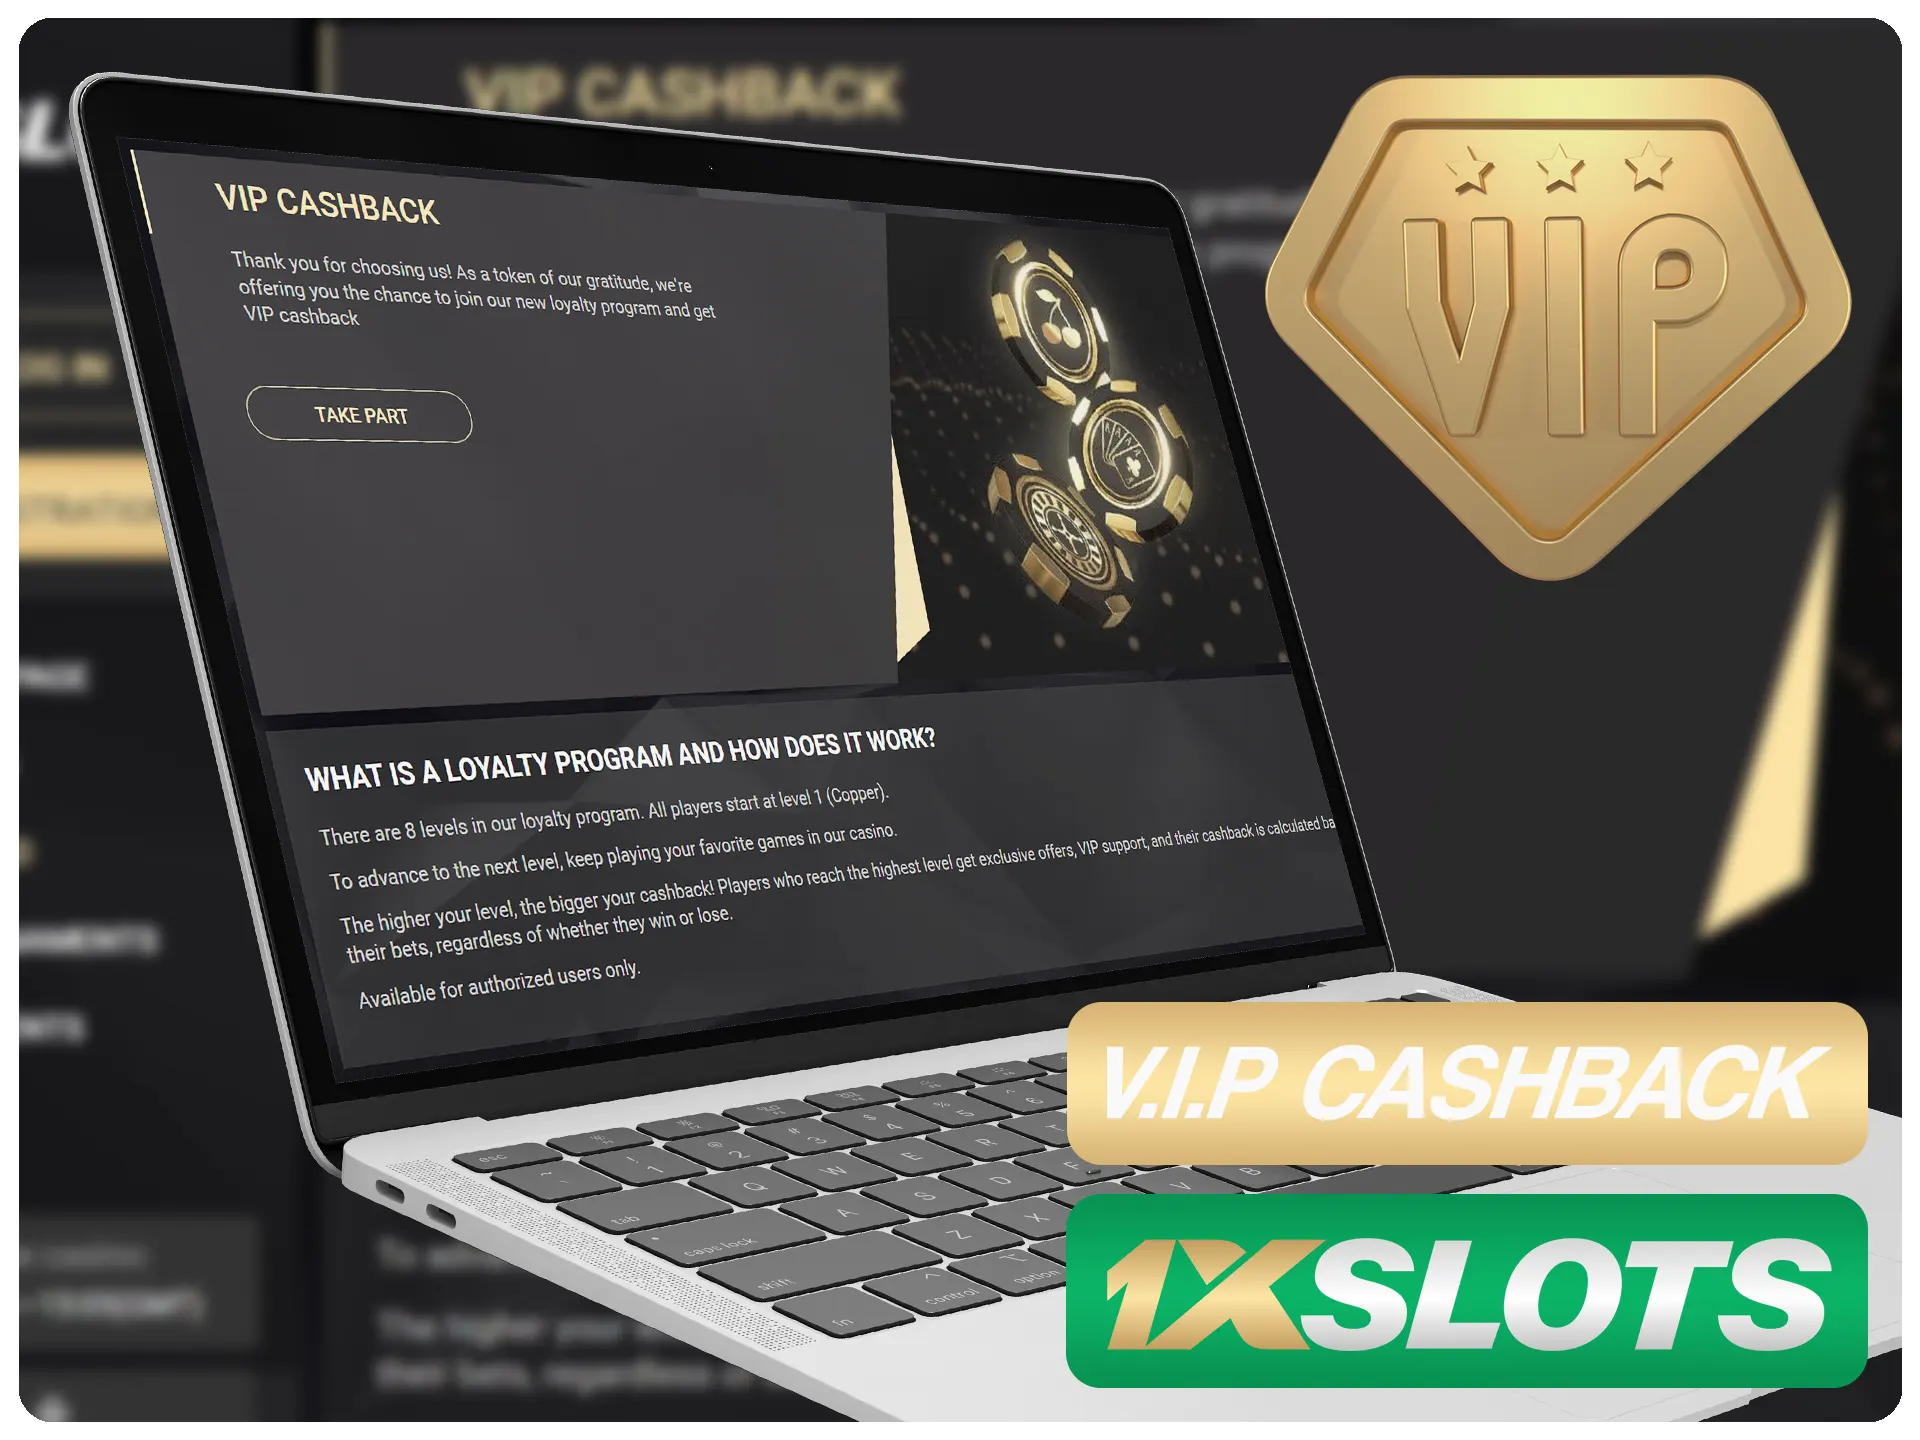 Join 1xSlots VIP club and get additional cashback.